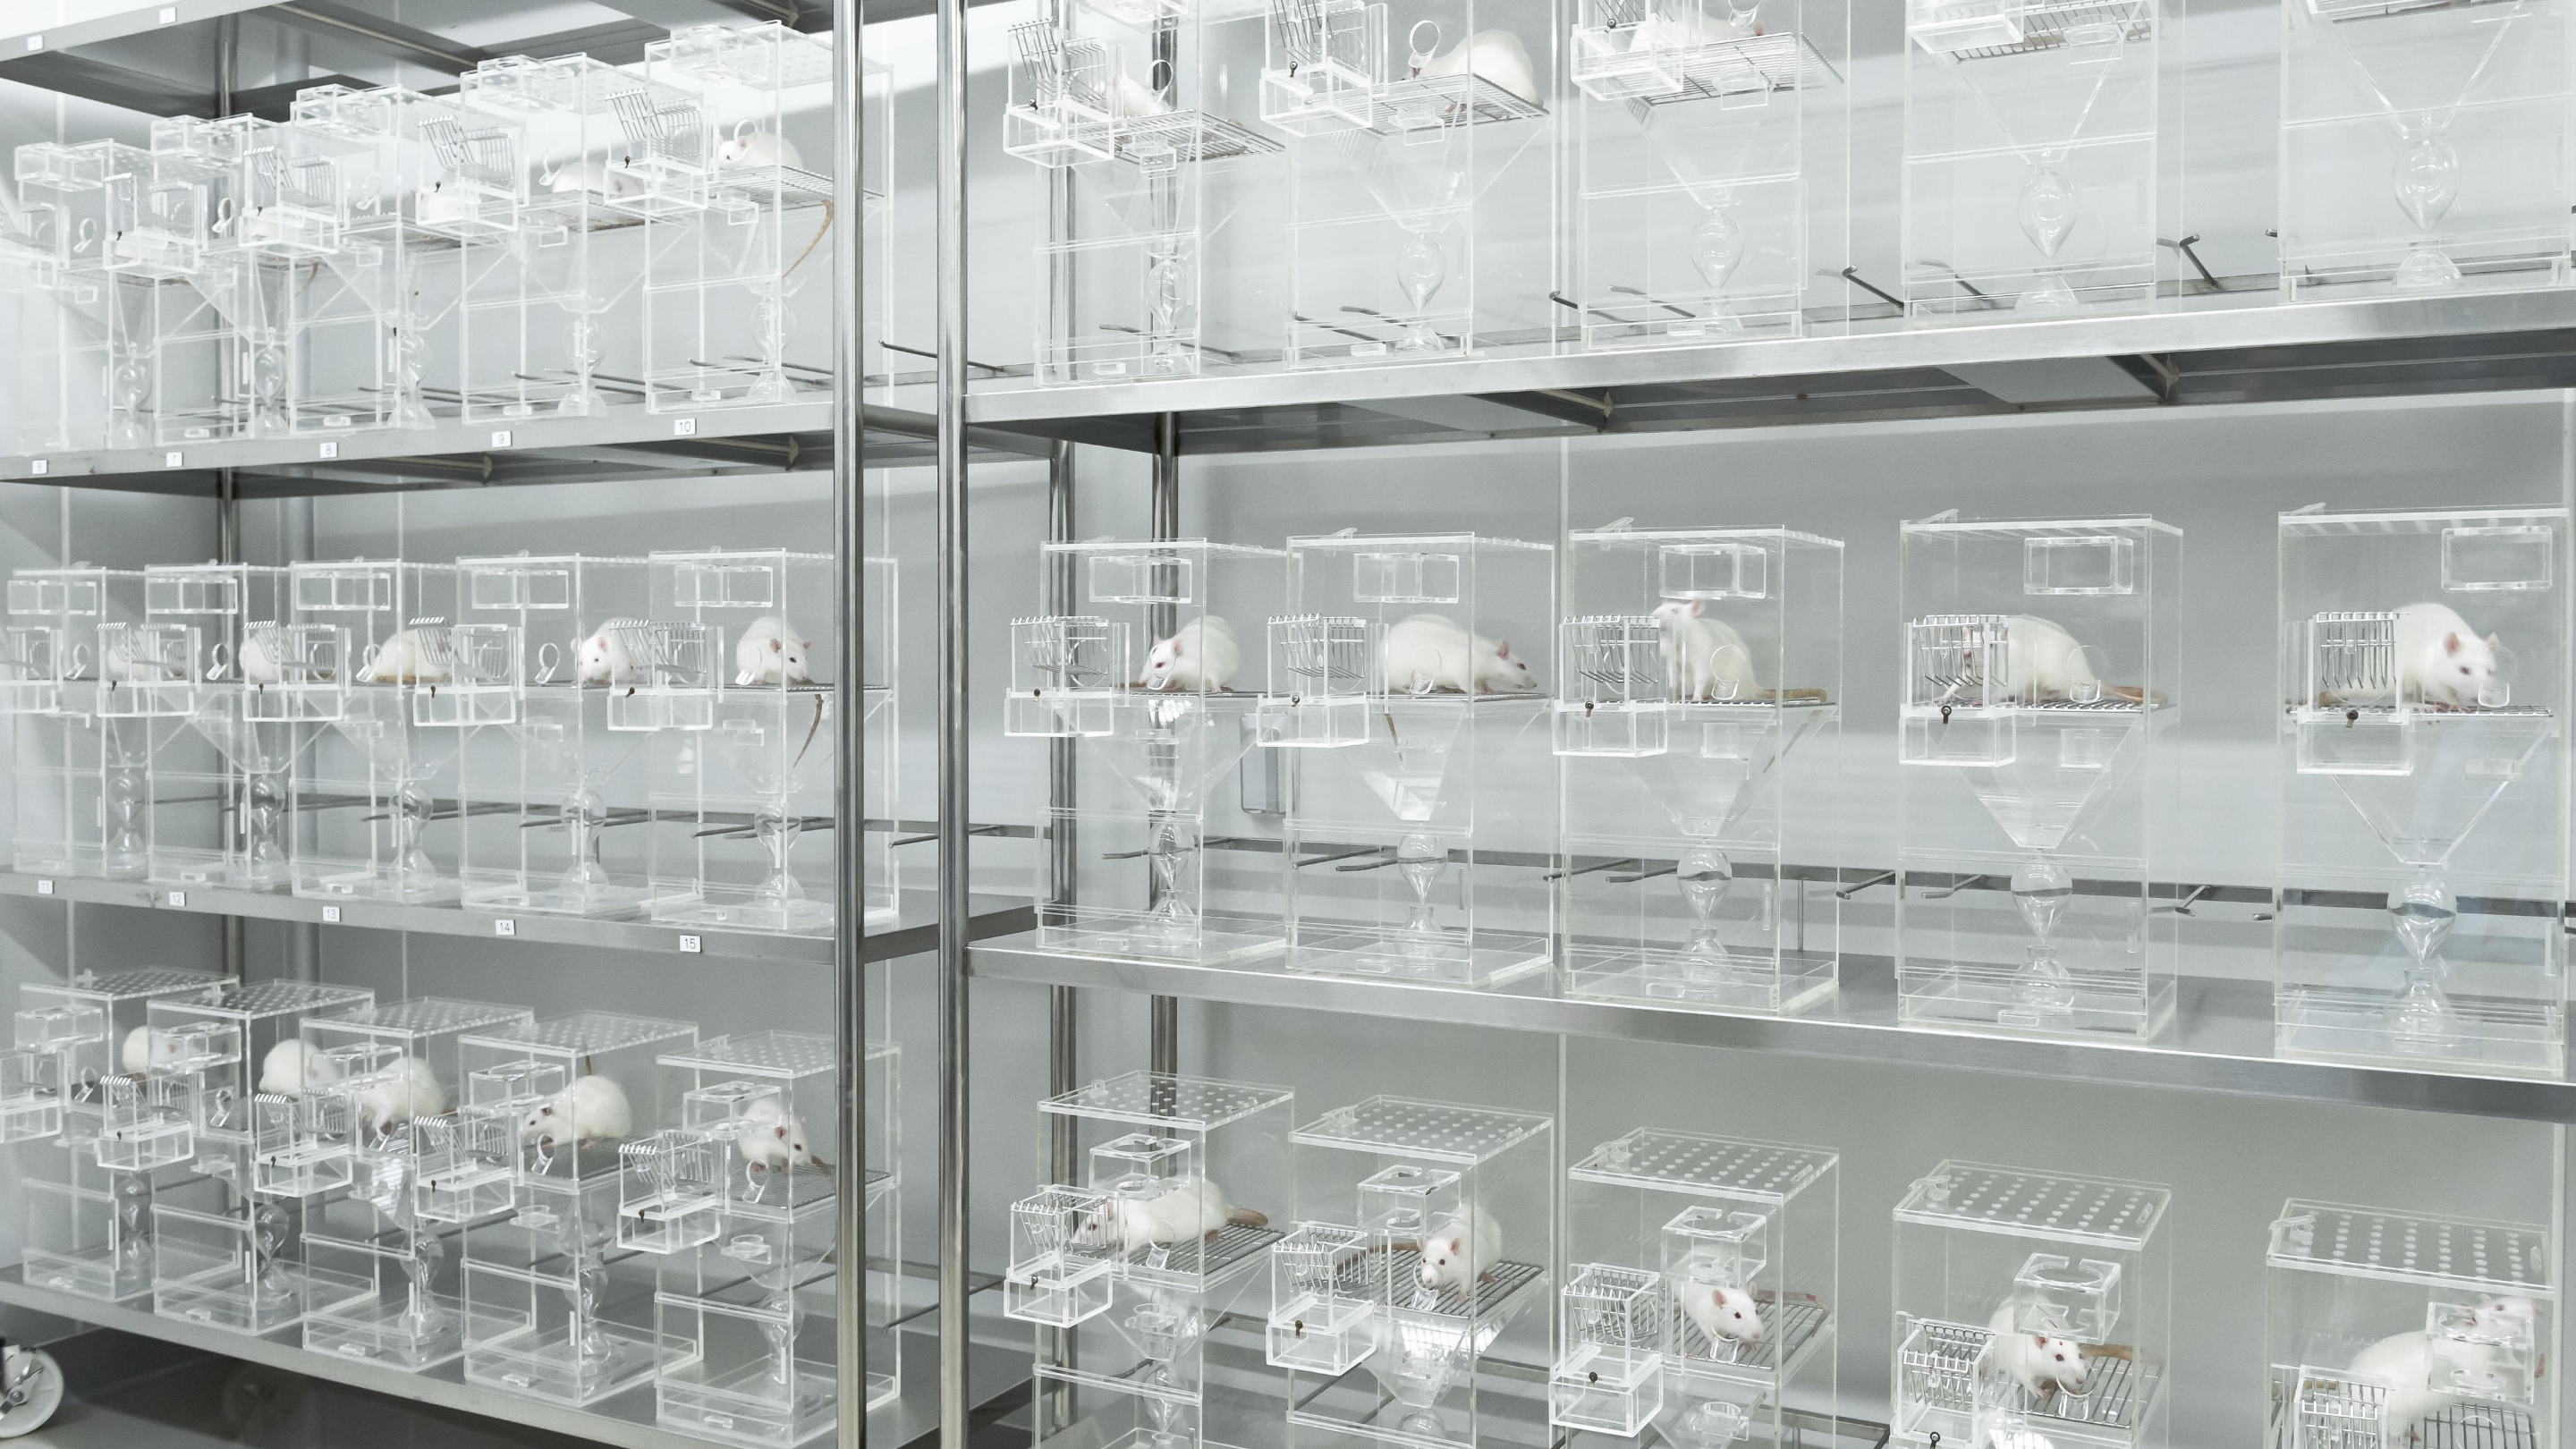 Shelves hold rows and rows of white rats in small, clear plastic cages